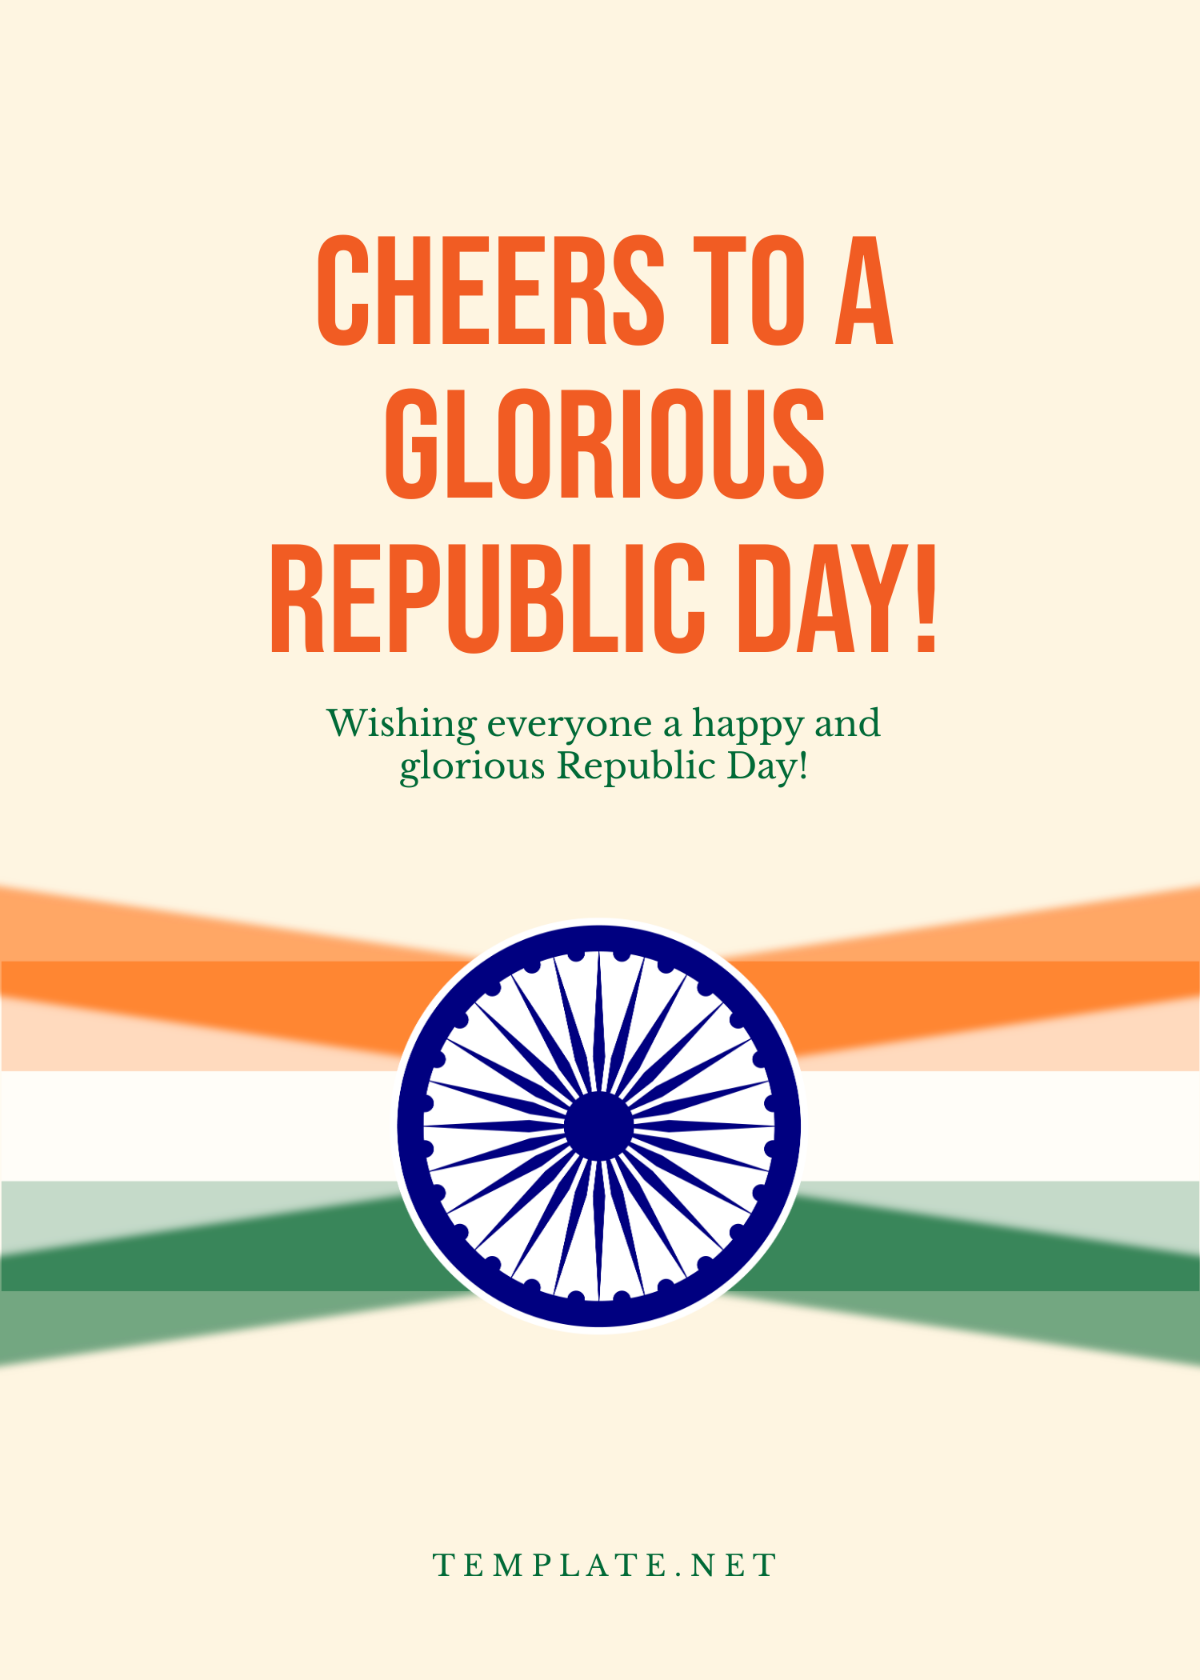 Republic Day Greeting Card Wishes Template